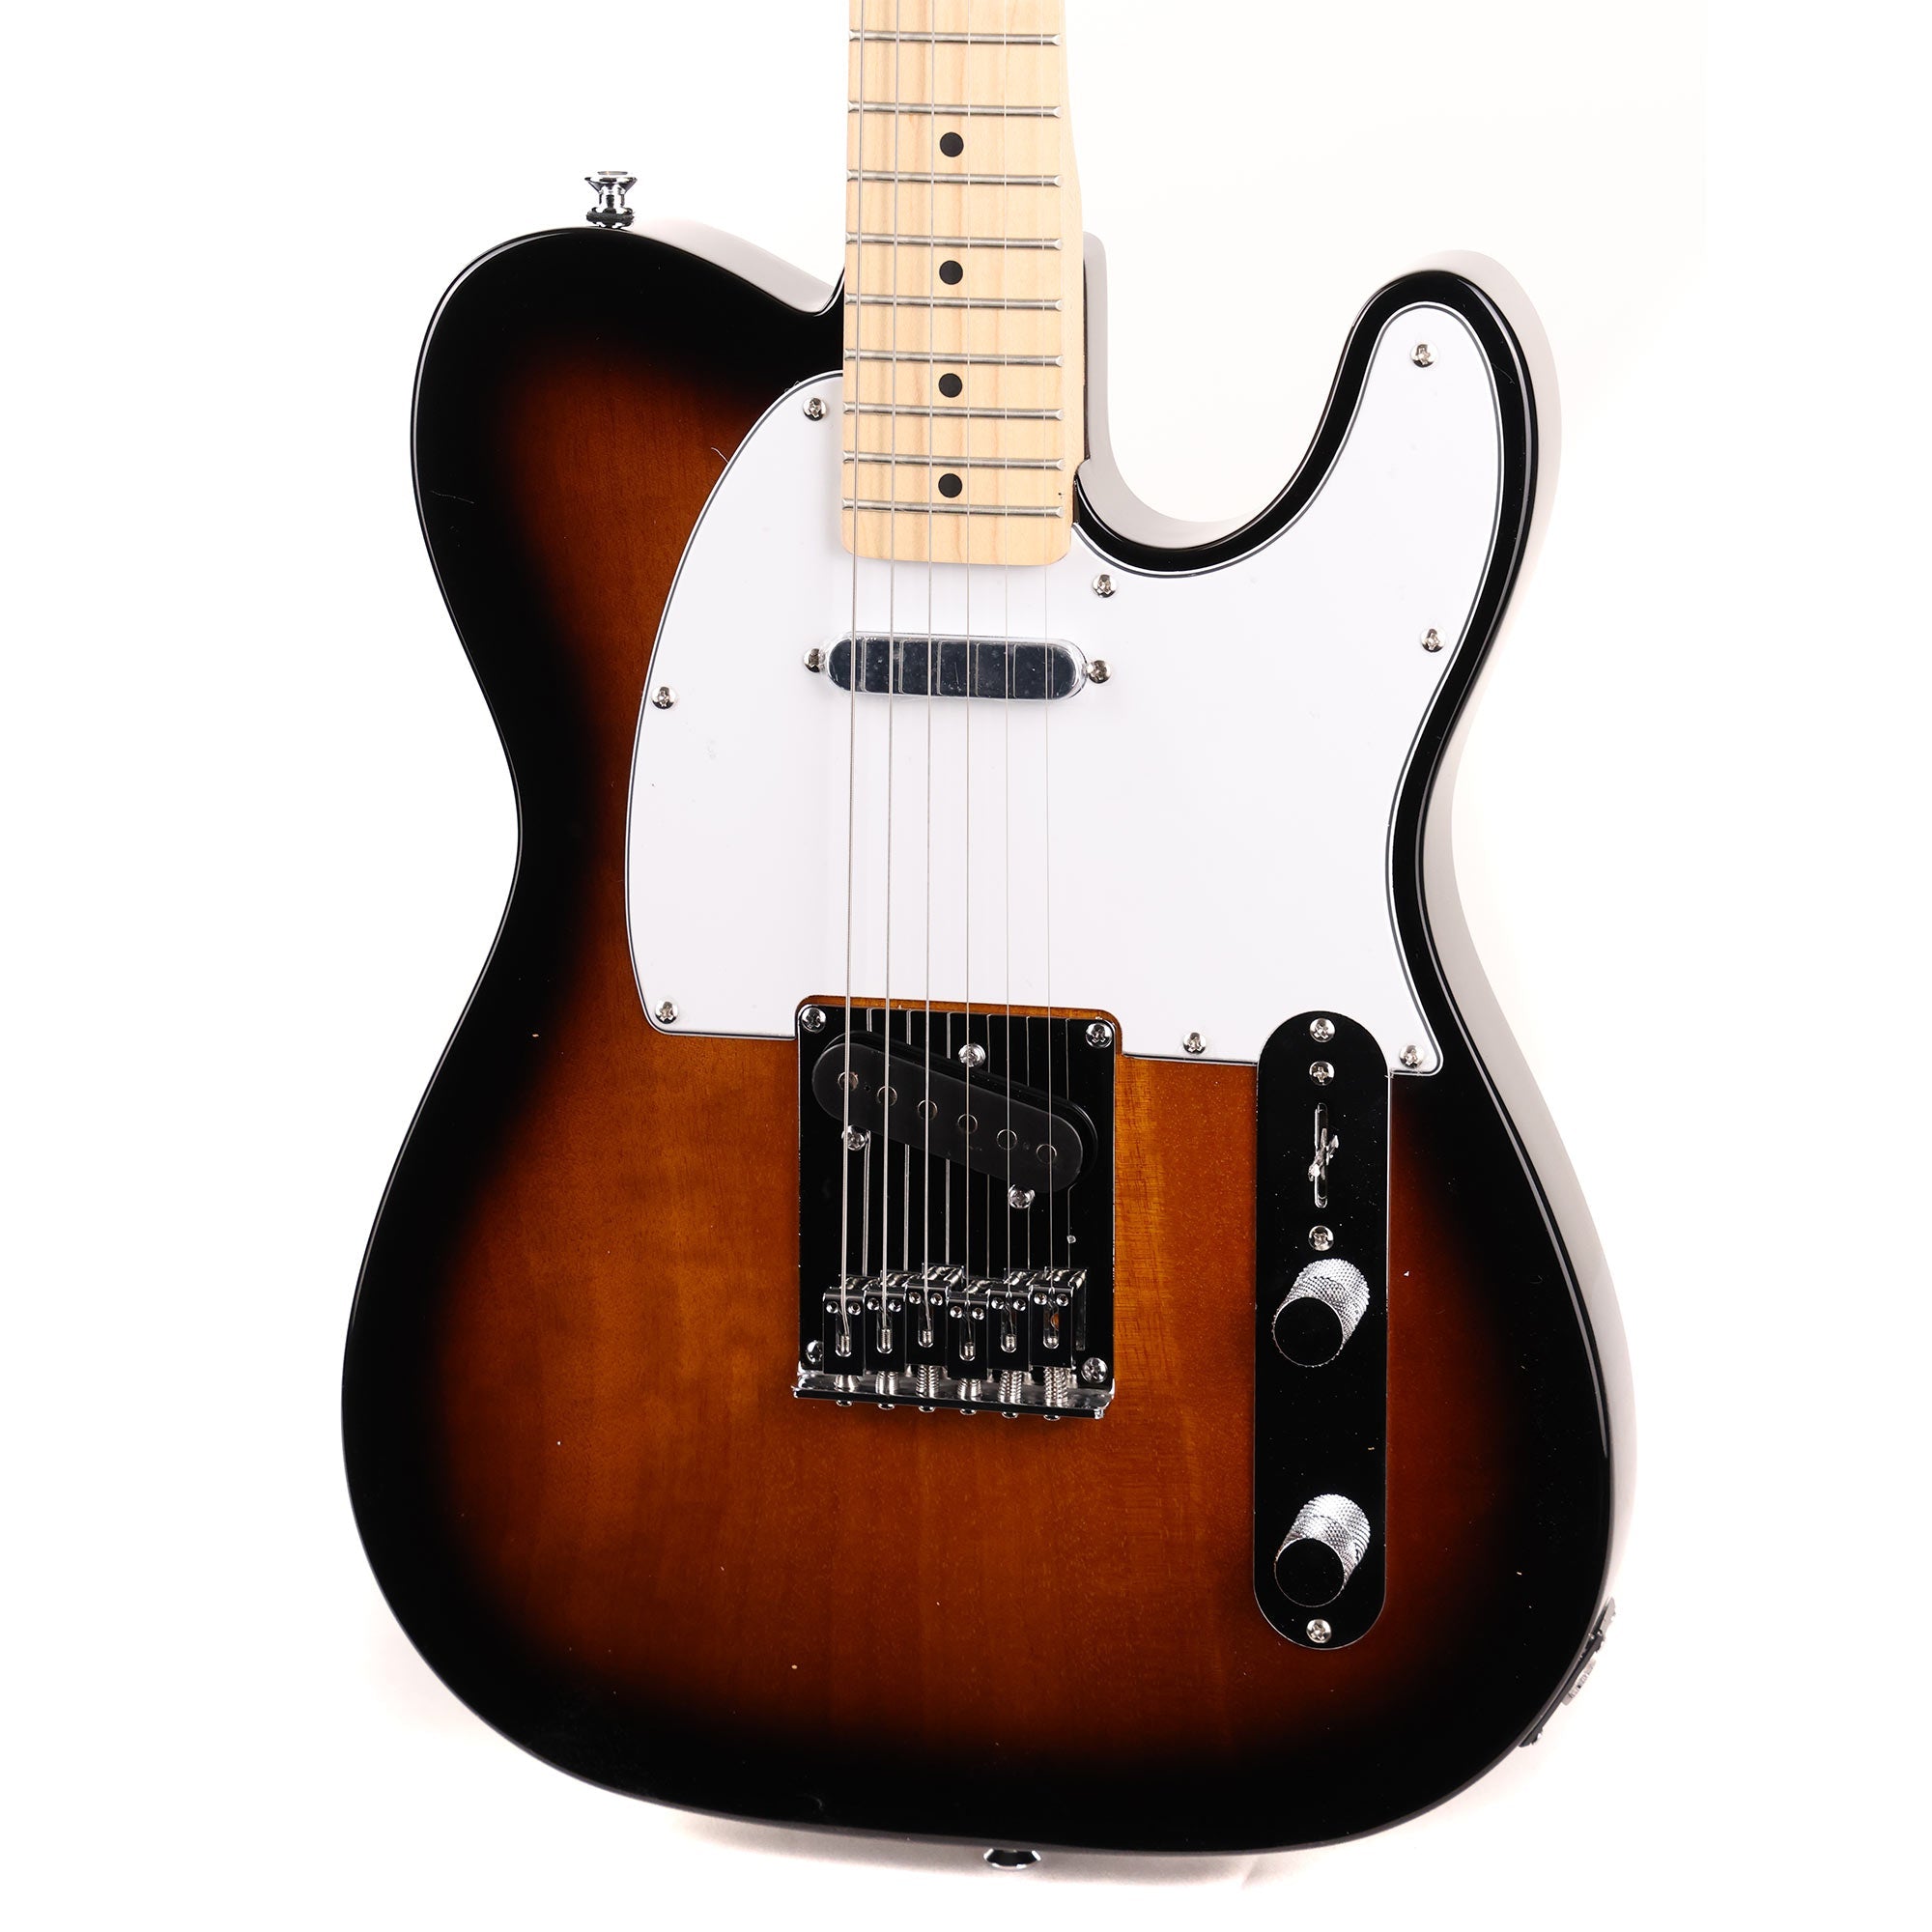 Squier Affinity Series Telecaster 2-Color Sunburst | The Music Zoo